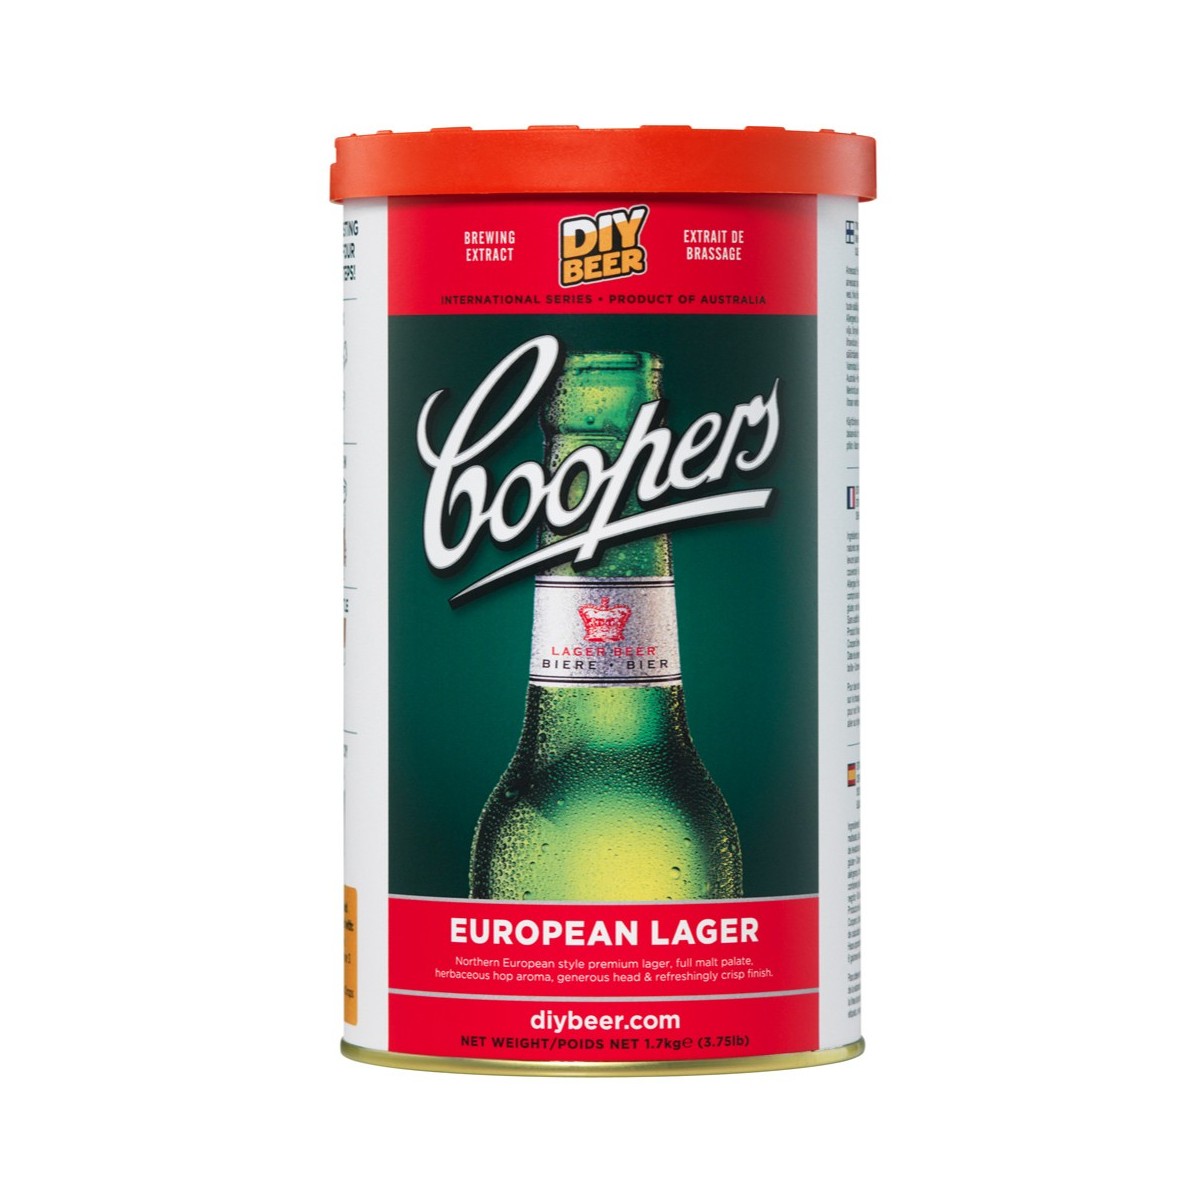 Alaus gamybos rinkinys Coopers European Lager 1,7 kg 23 ltr.